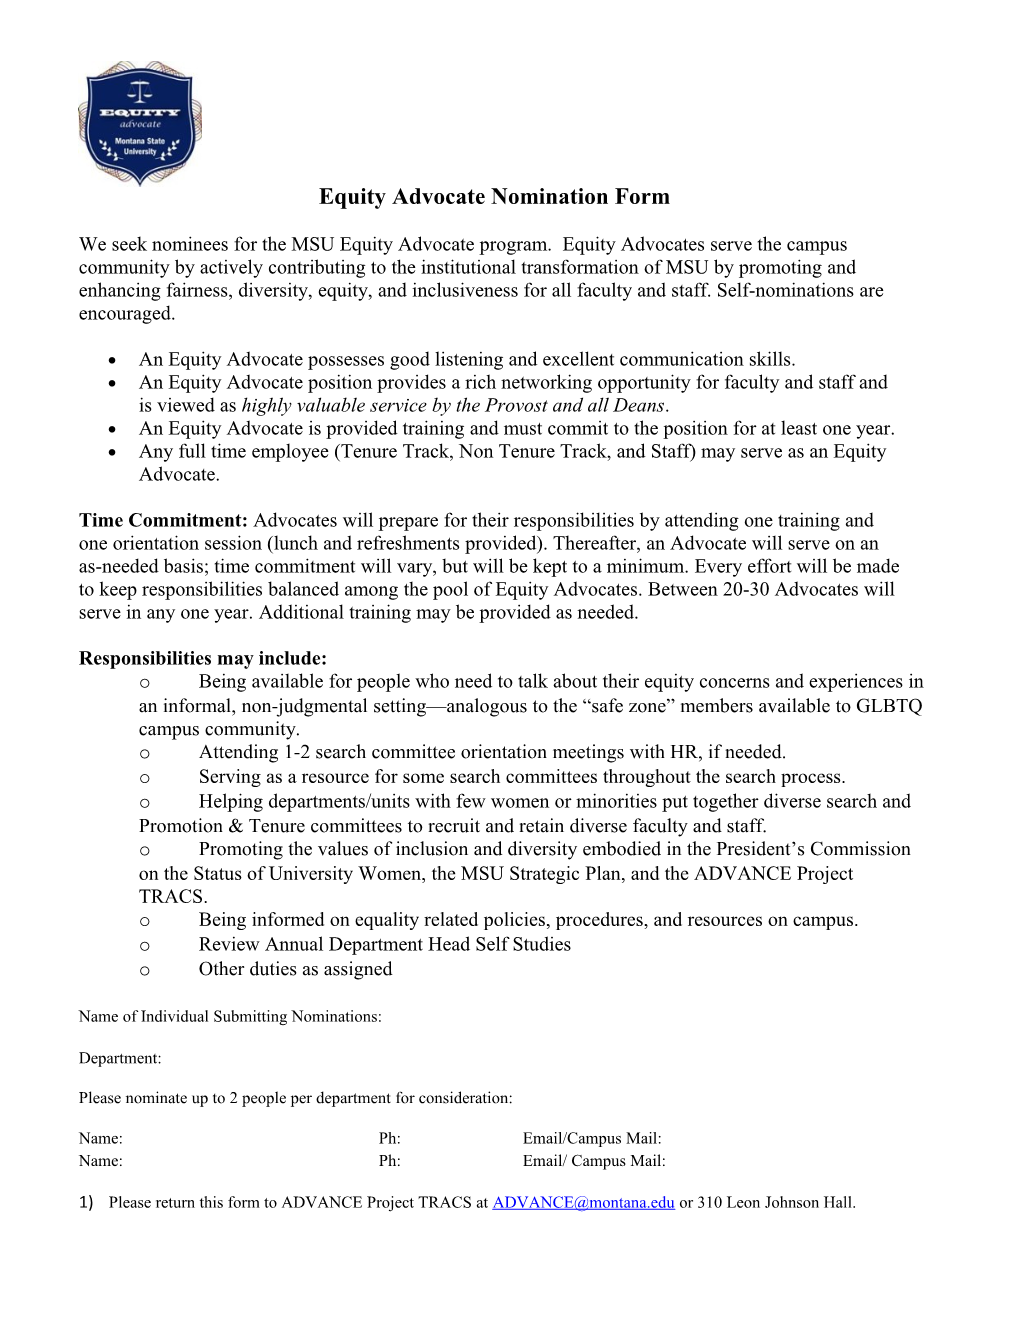 Equity Advocate Nomination Form